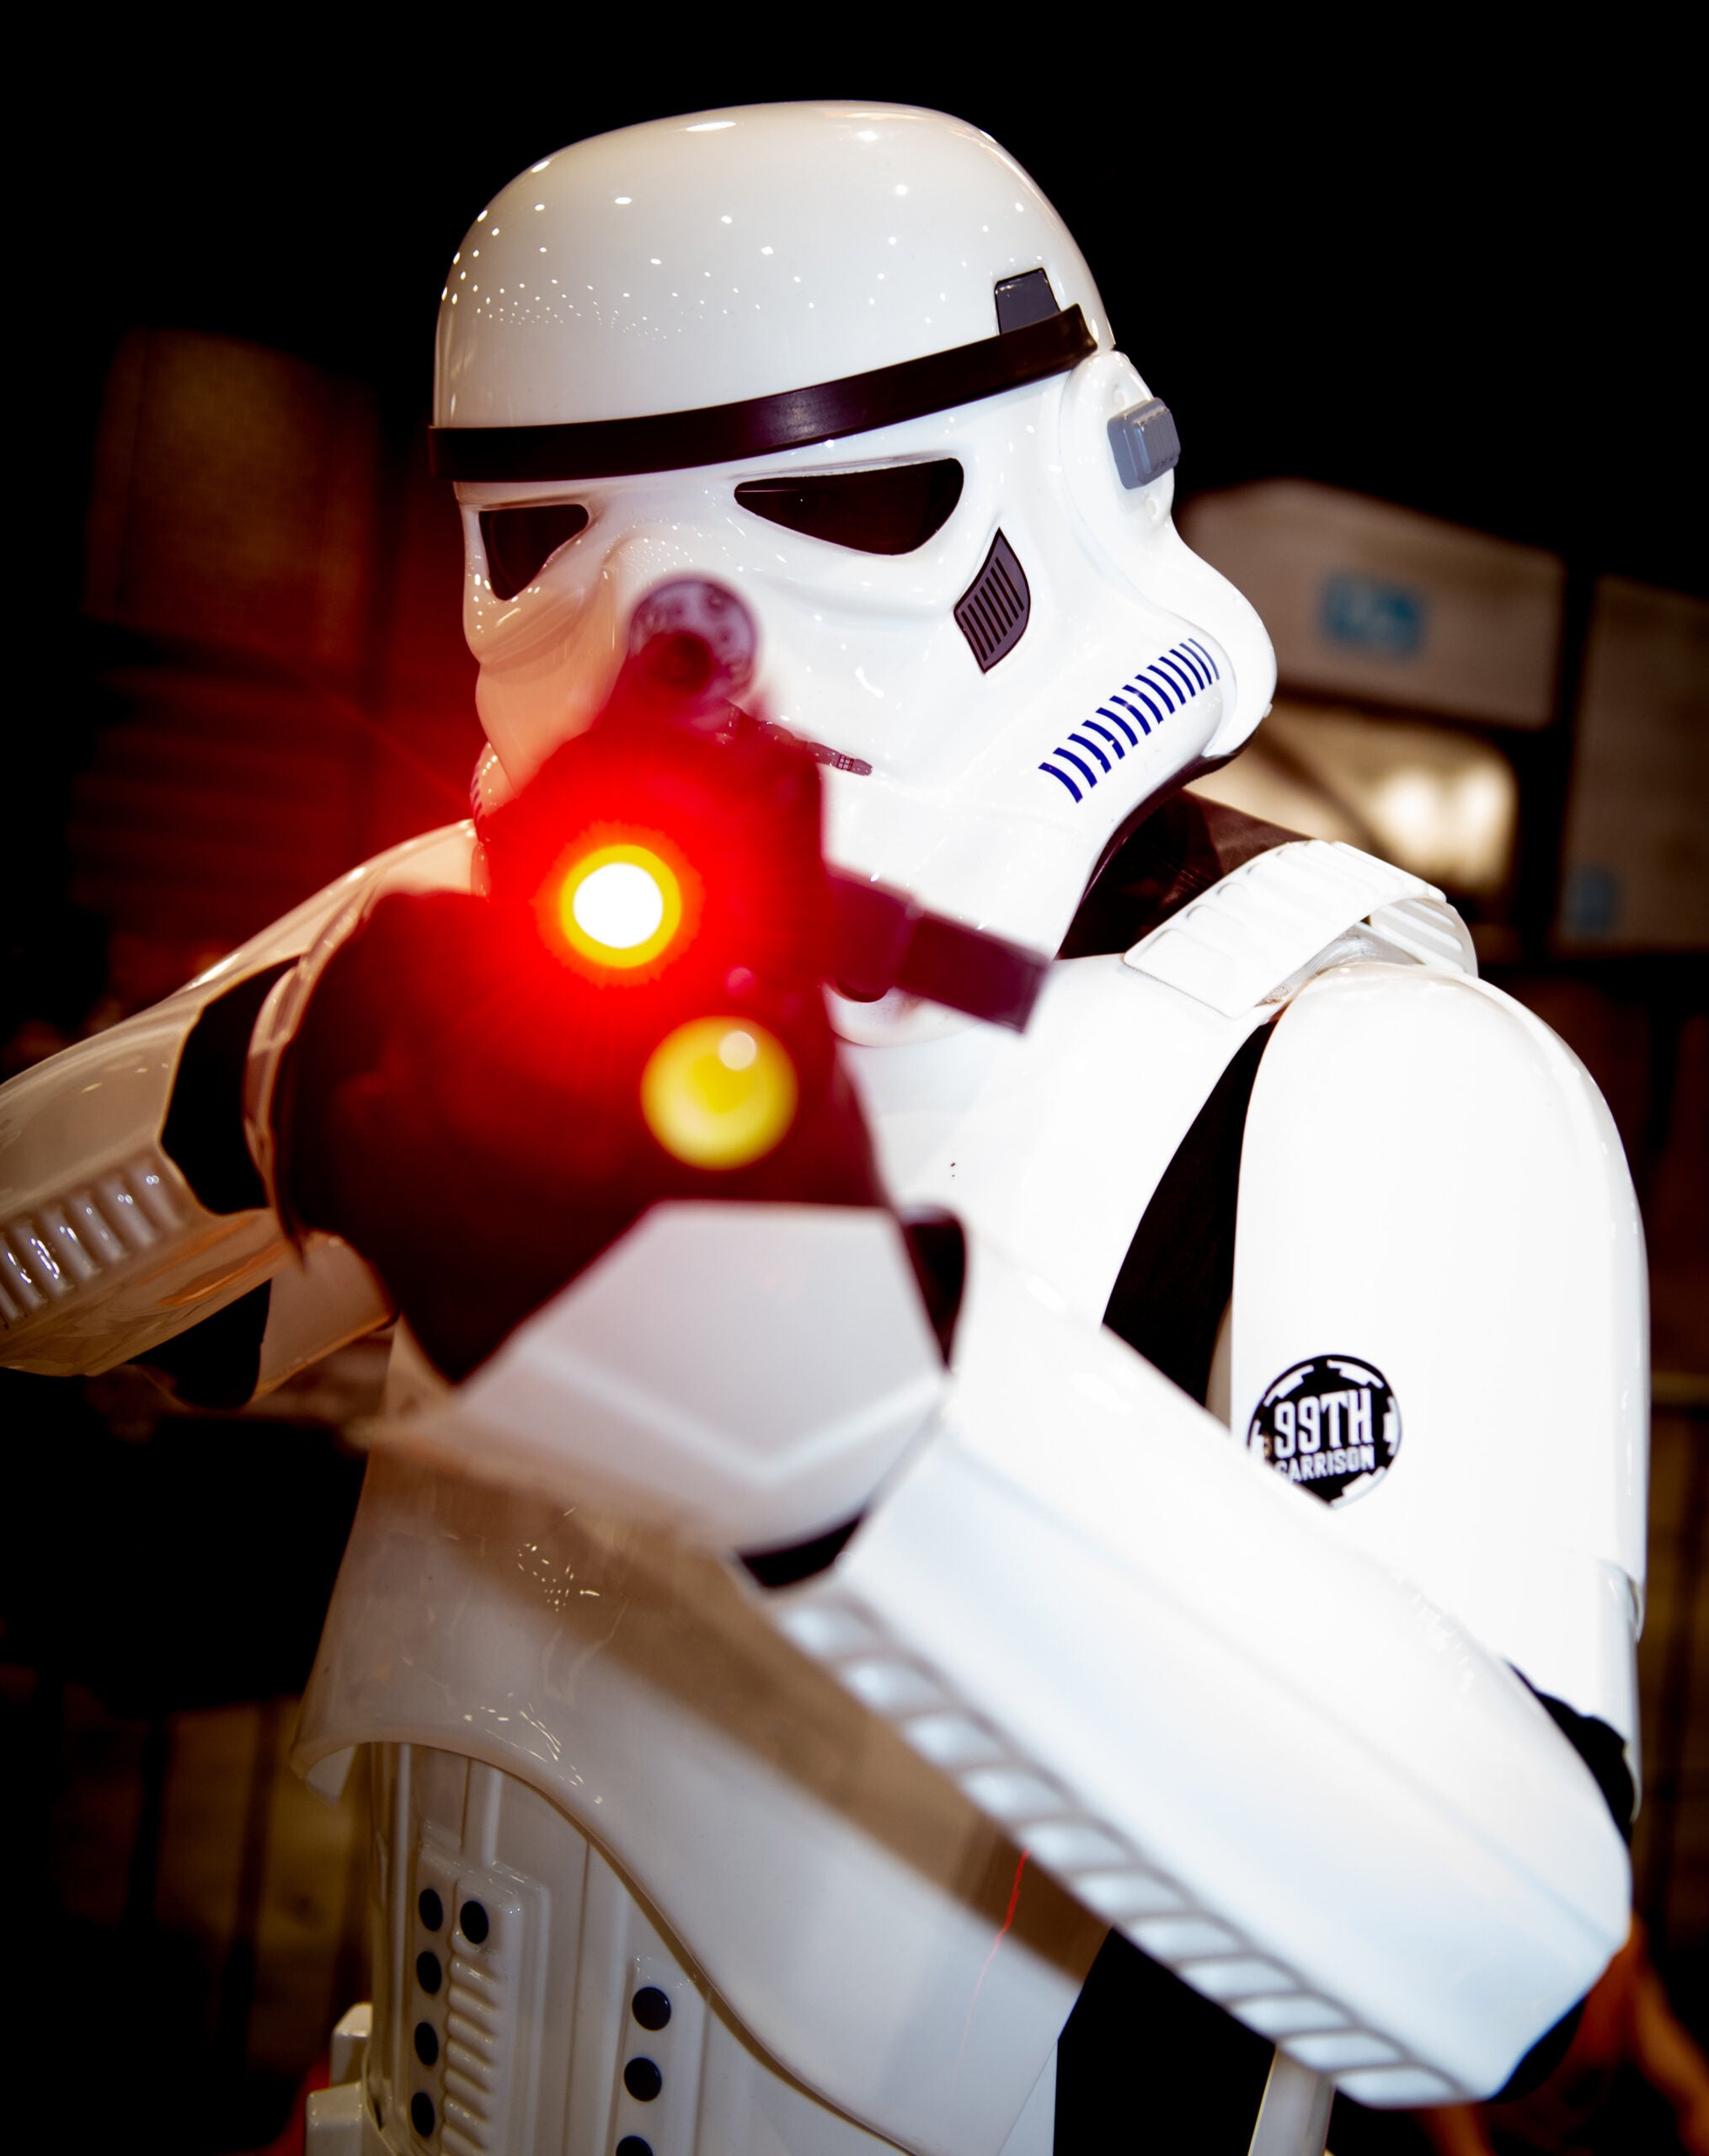 LIVERPOOL, ENGLAND - MARCH 08: Cosplayer dressed as a stormtrooper of Star Wars attends Comic Con Liverpool 2020 on March 08, 2020 in Liverpool, England. (Photo by Shirlaine Forrest/WireImage)